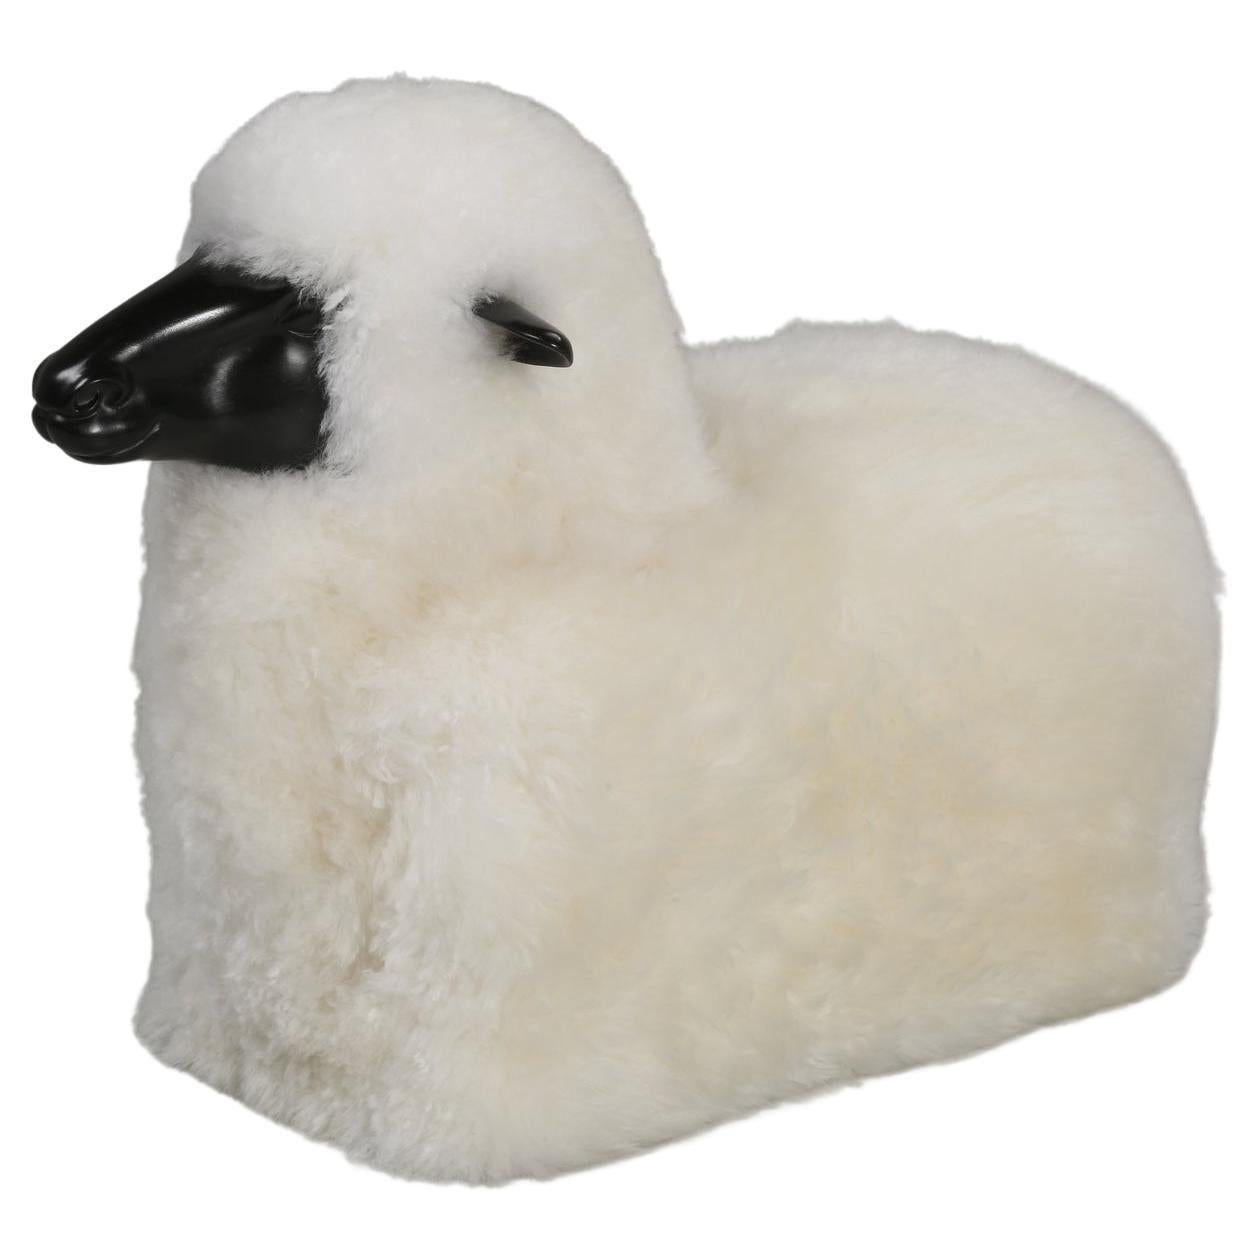 Baby Lamb Made in American by Skilled Artisans and Covered in Real Sheep Fur For Sale